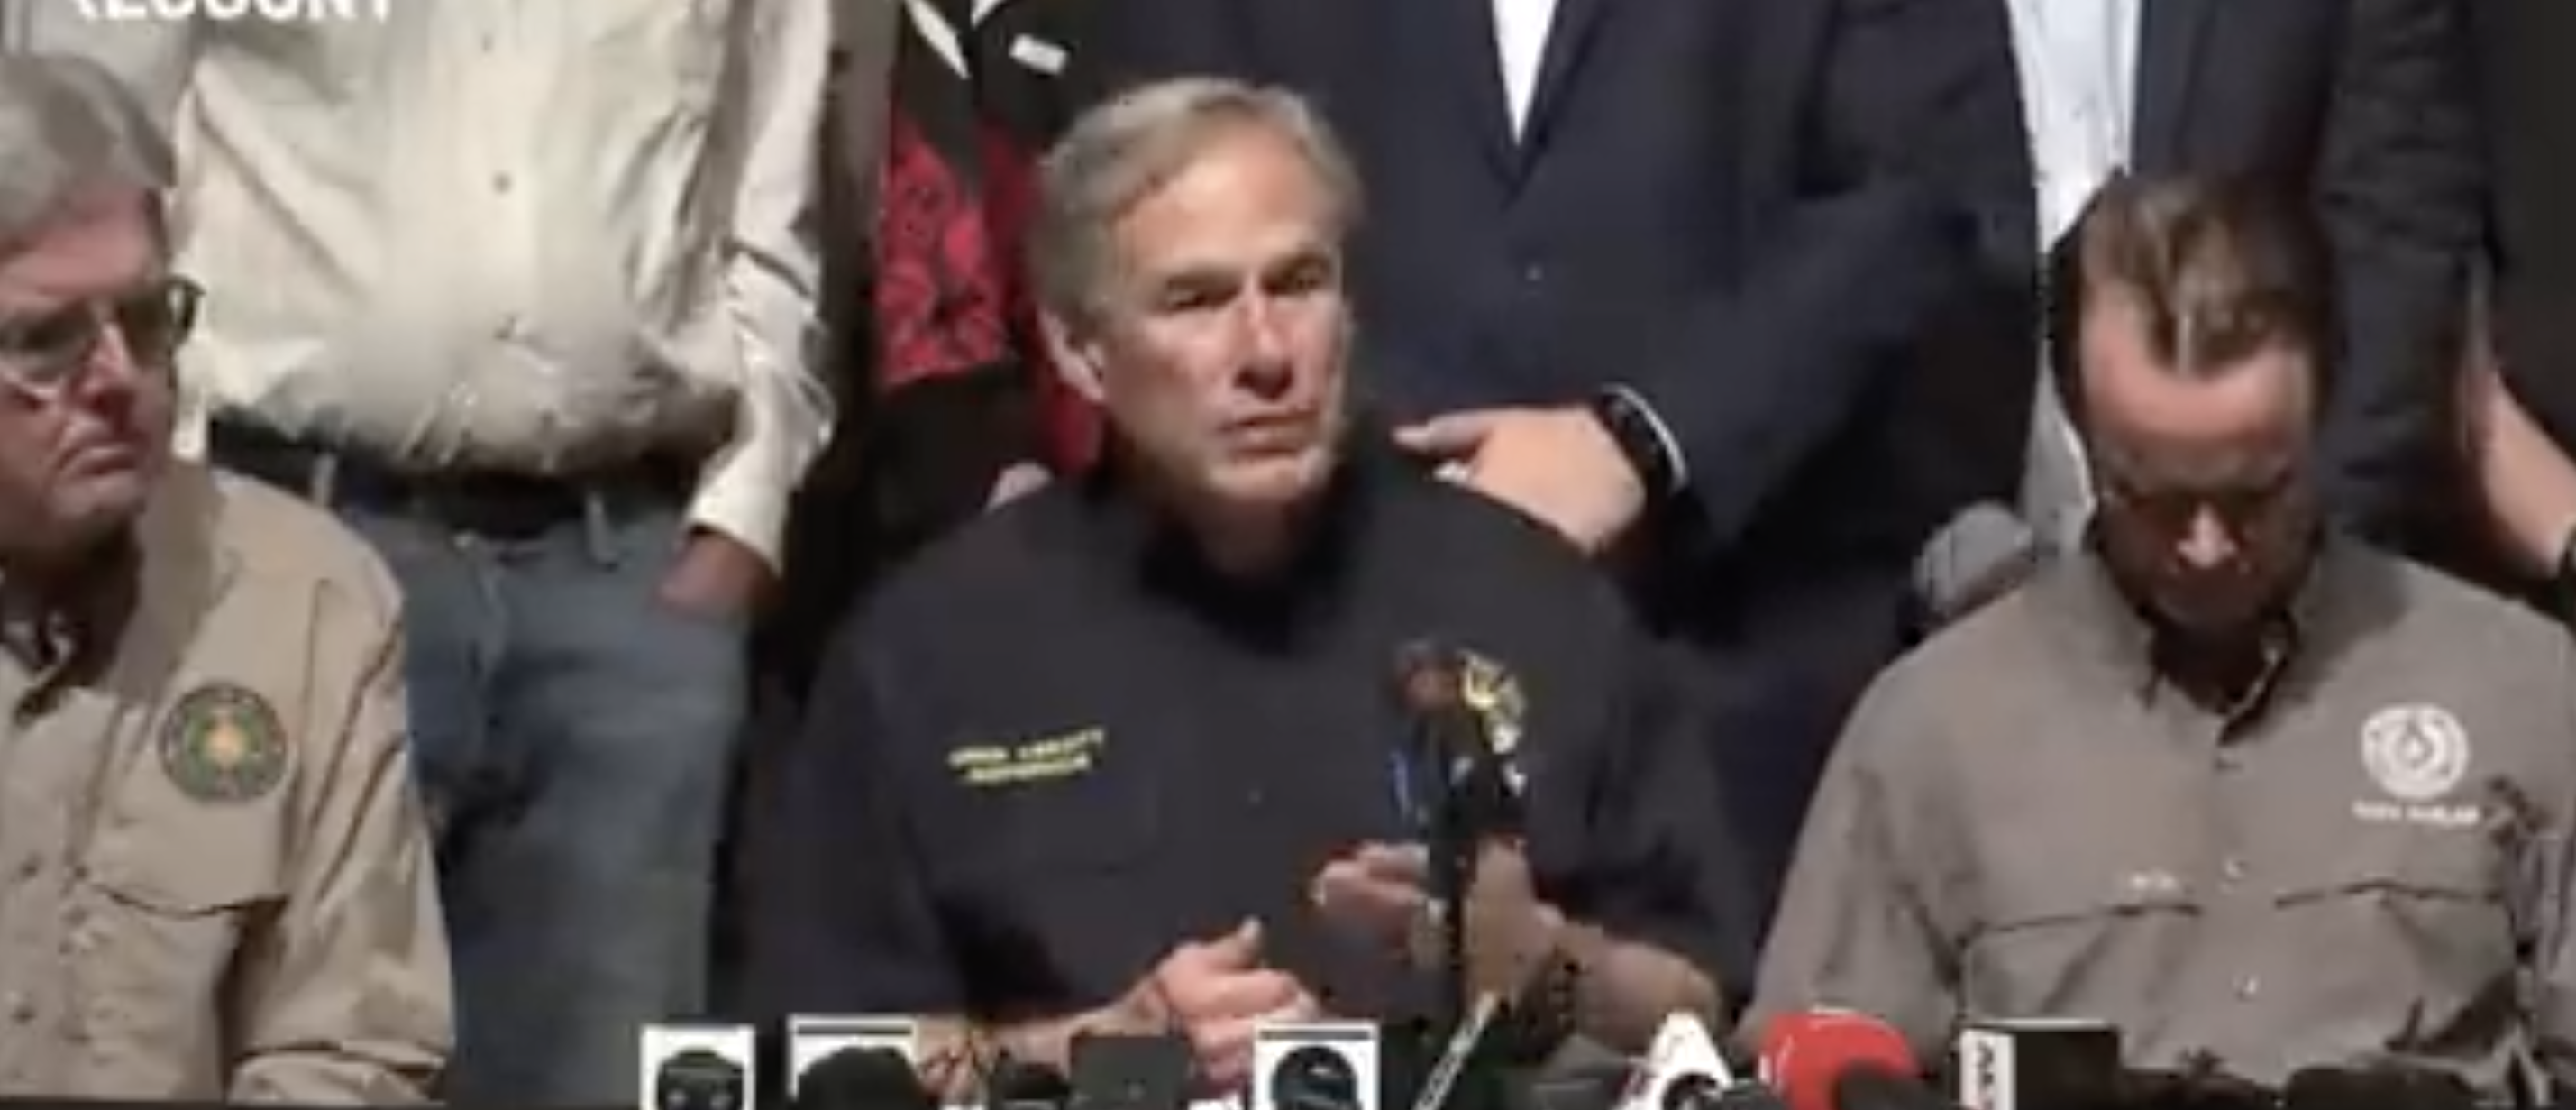 ‘I’m Going To Shoot An Elementary School’: Suspected Shooter Gave 15 Min Warning, Abbott Says